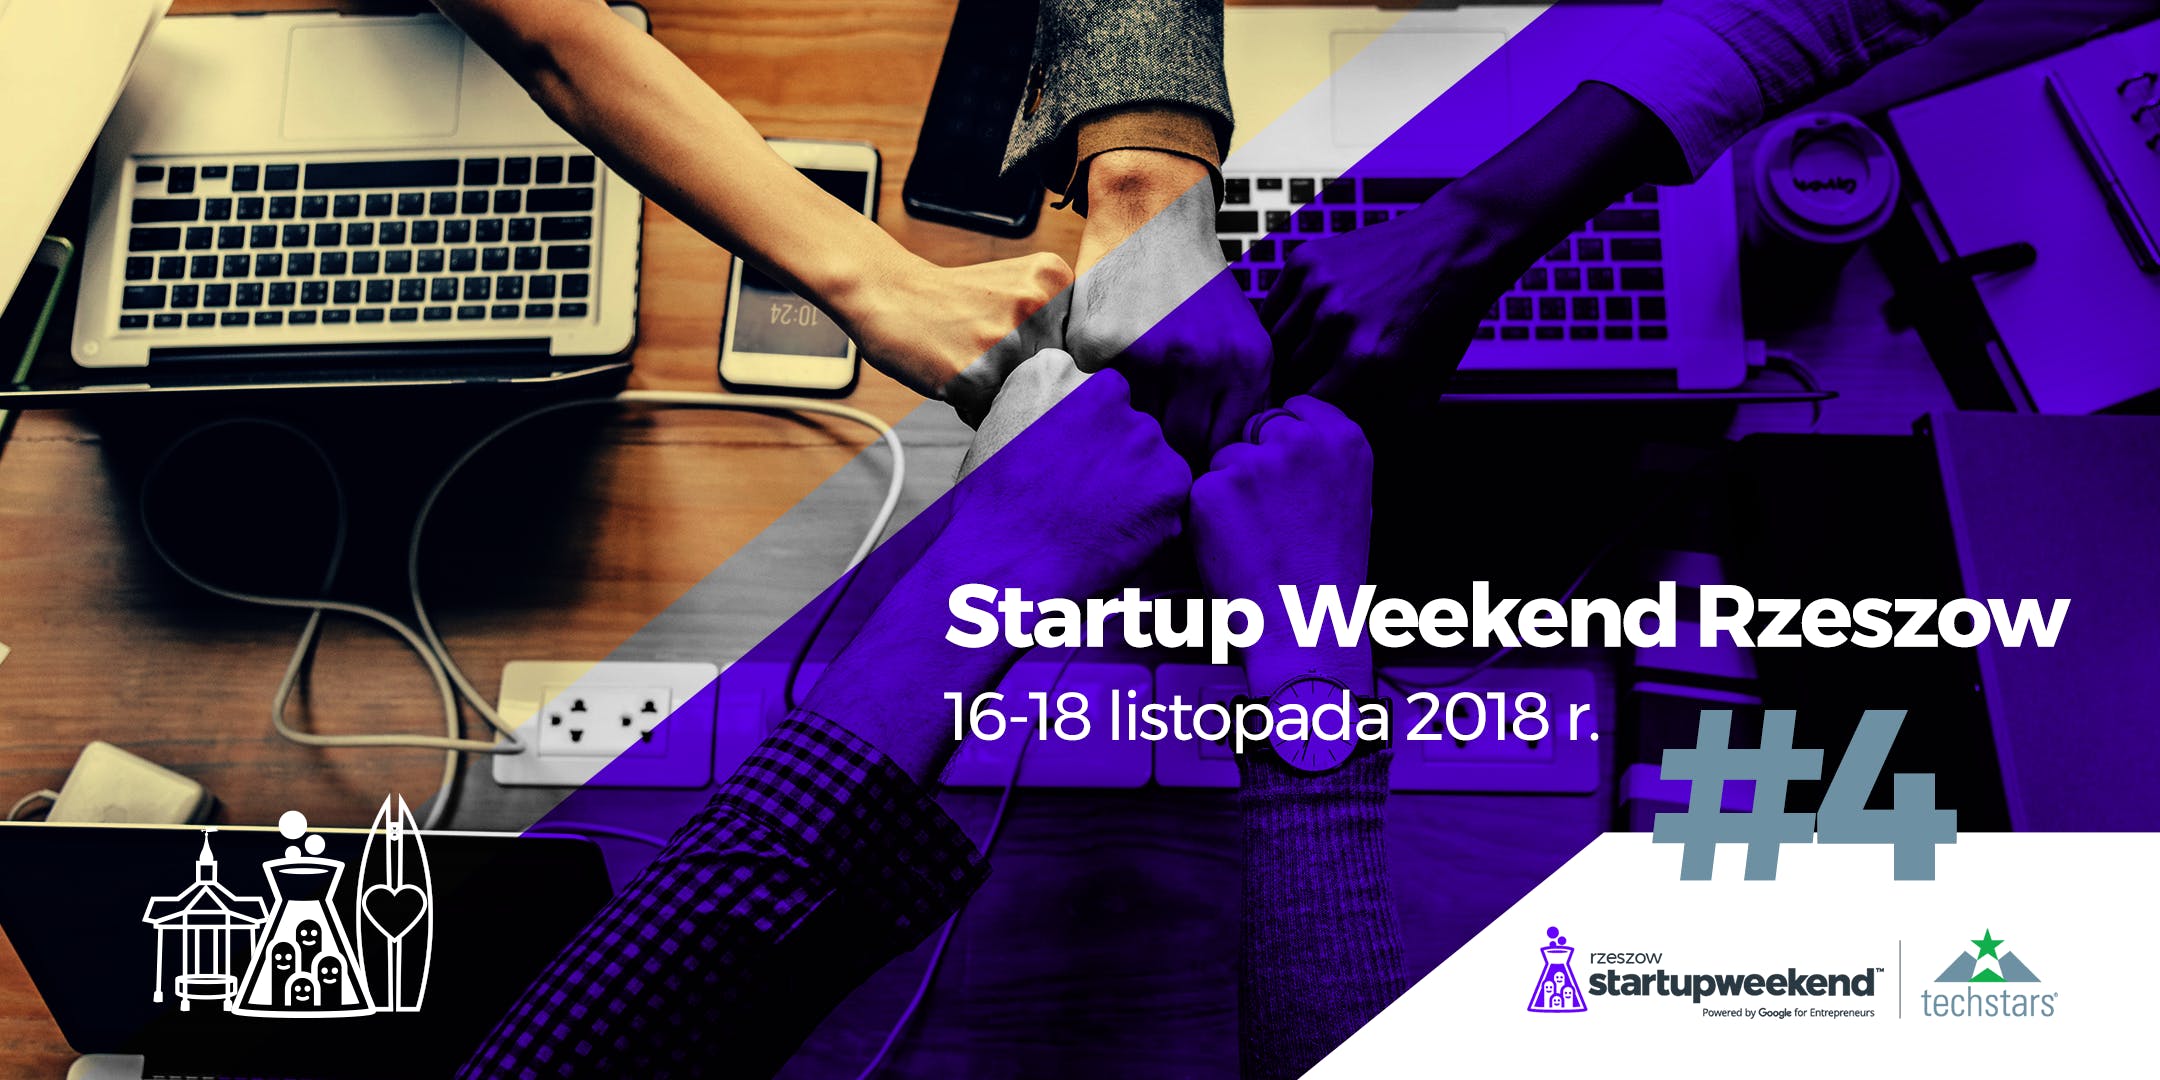 OSS at the Startup weekend